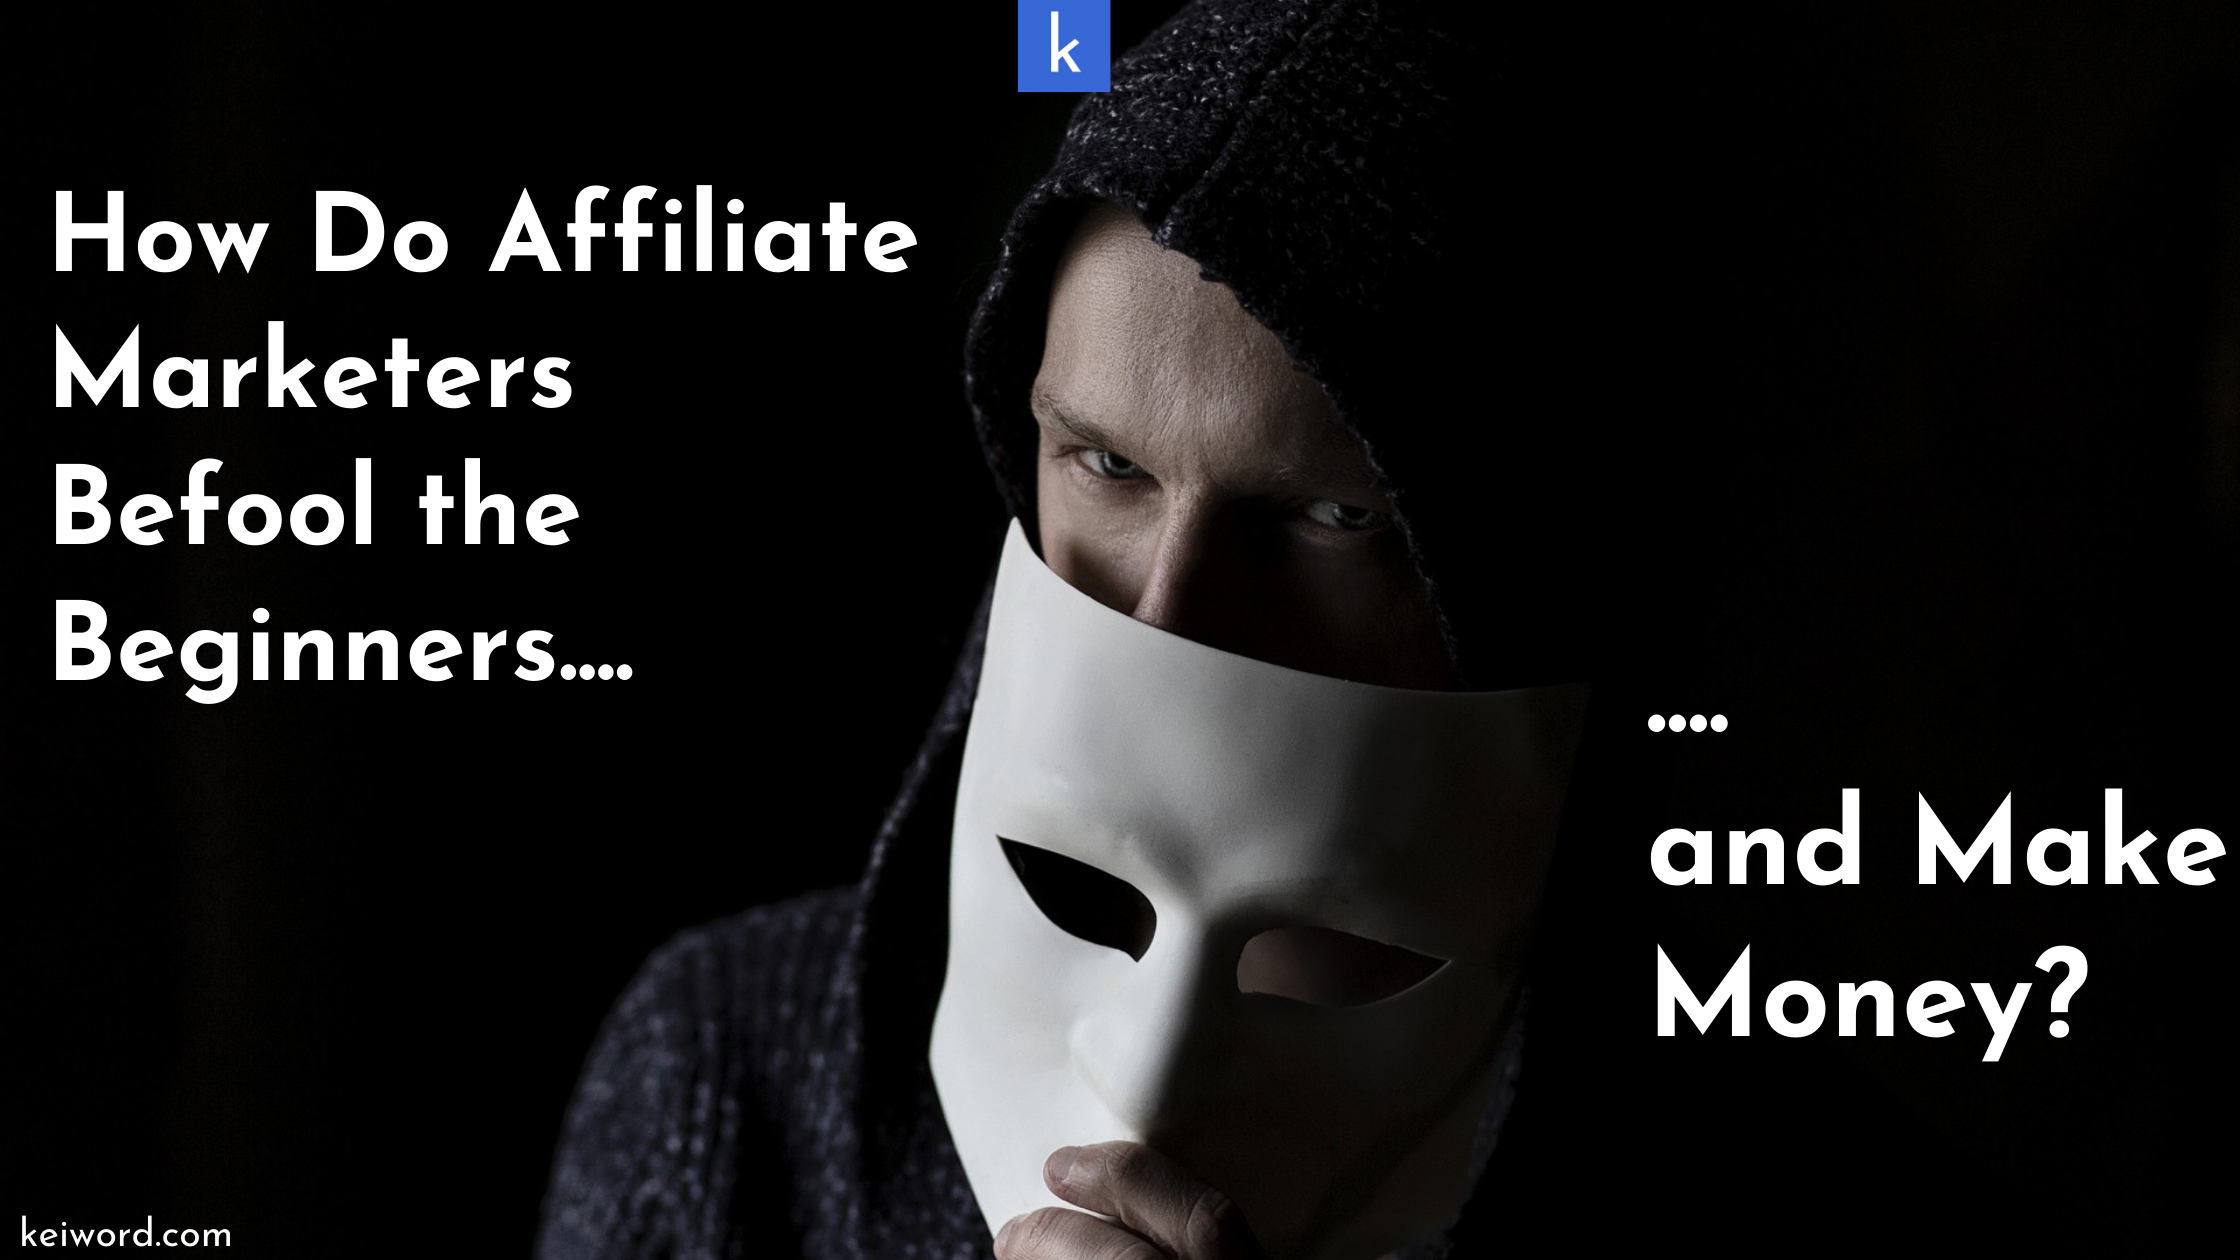 How Do Affiliate Marketers Befool the Beginners and Make Money - my own experience